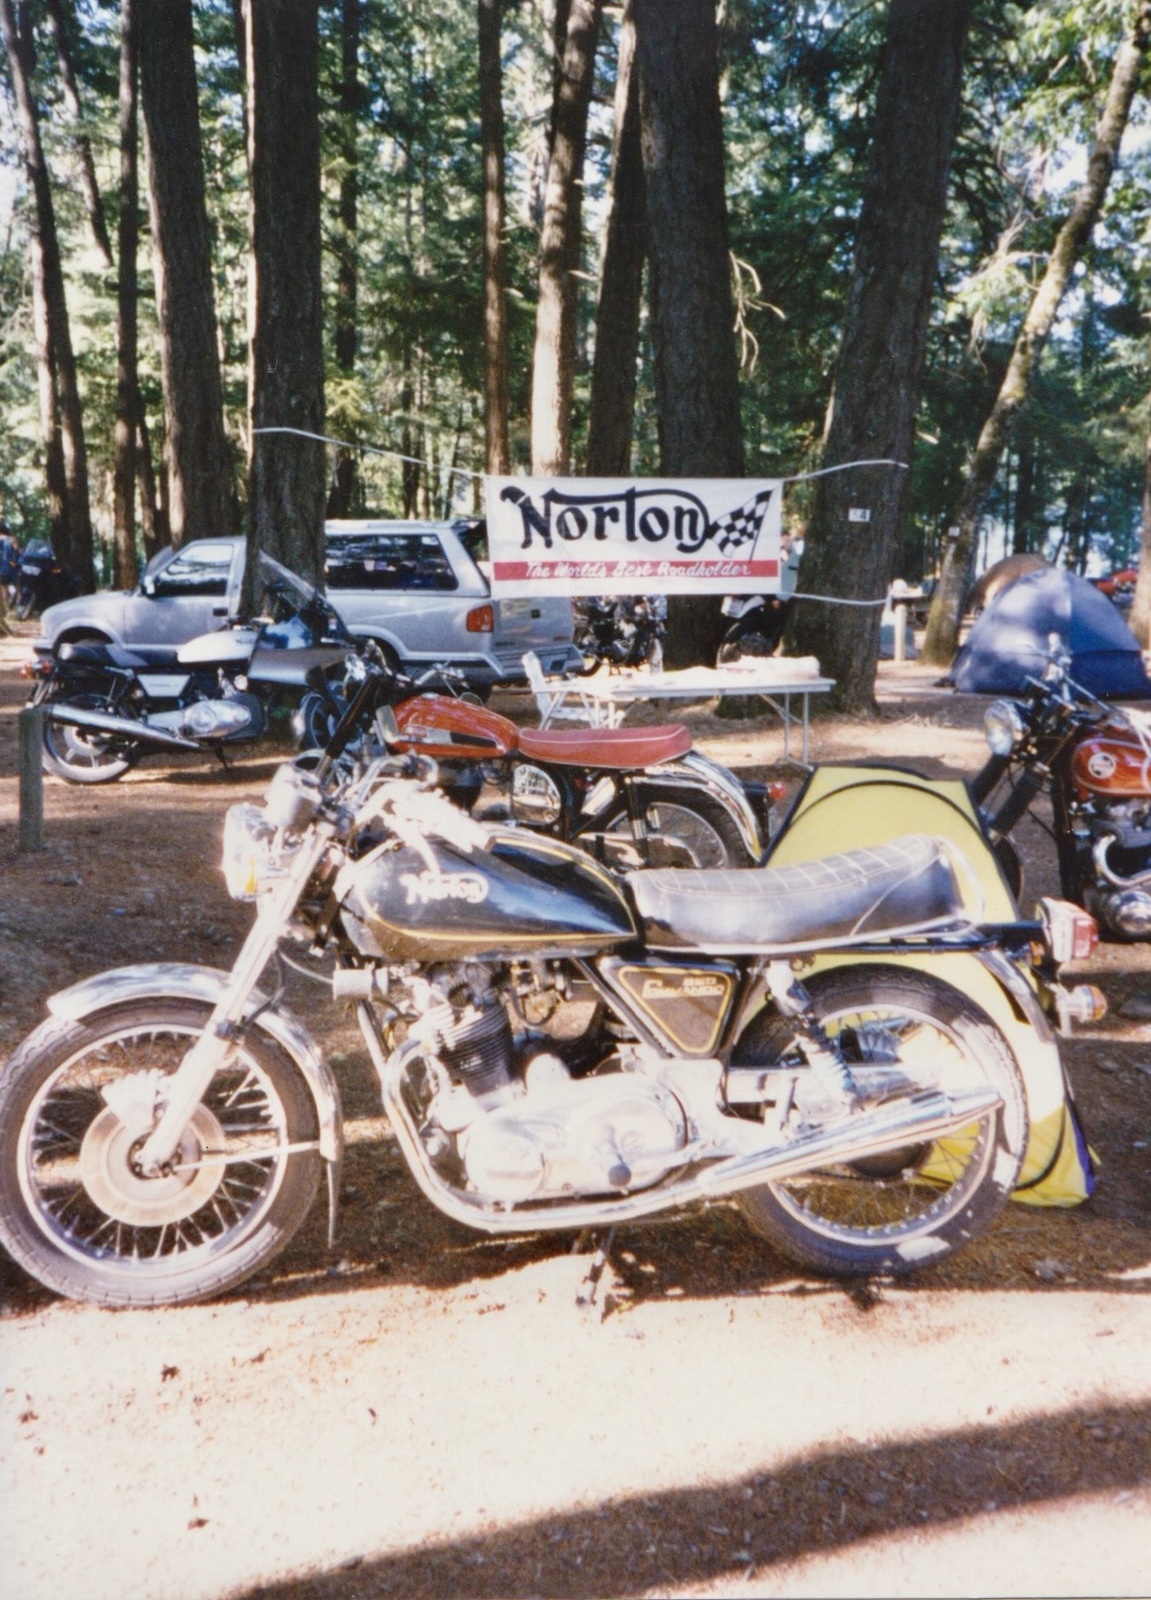 Norton Commandos from my 1990s Archive